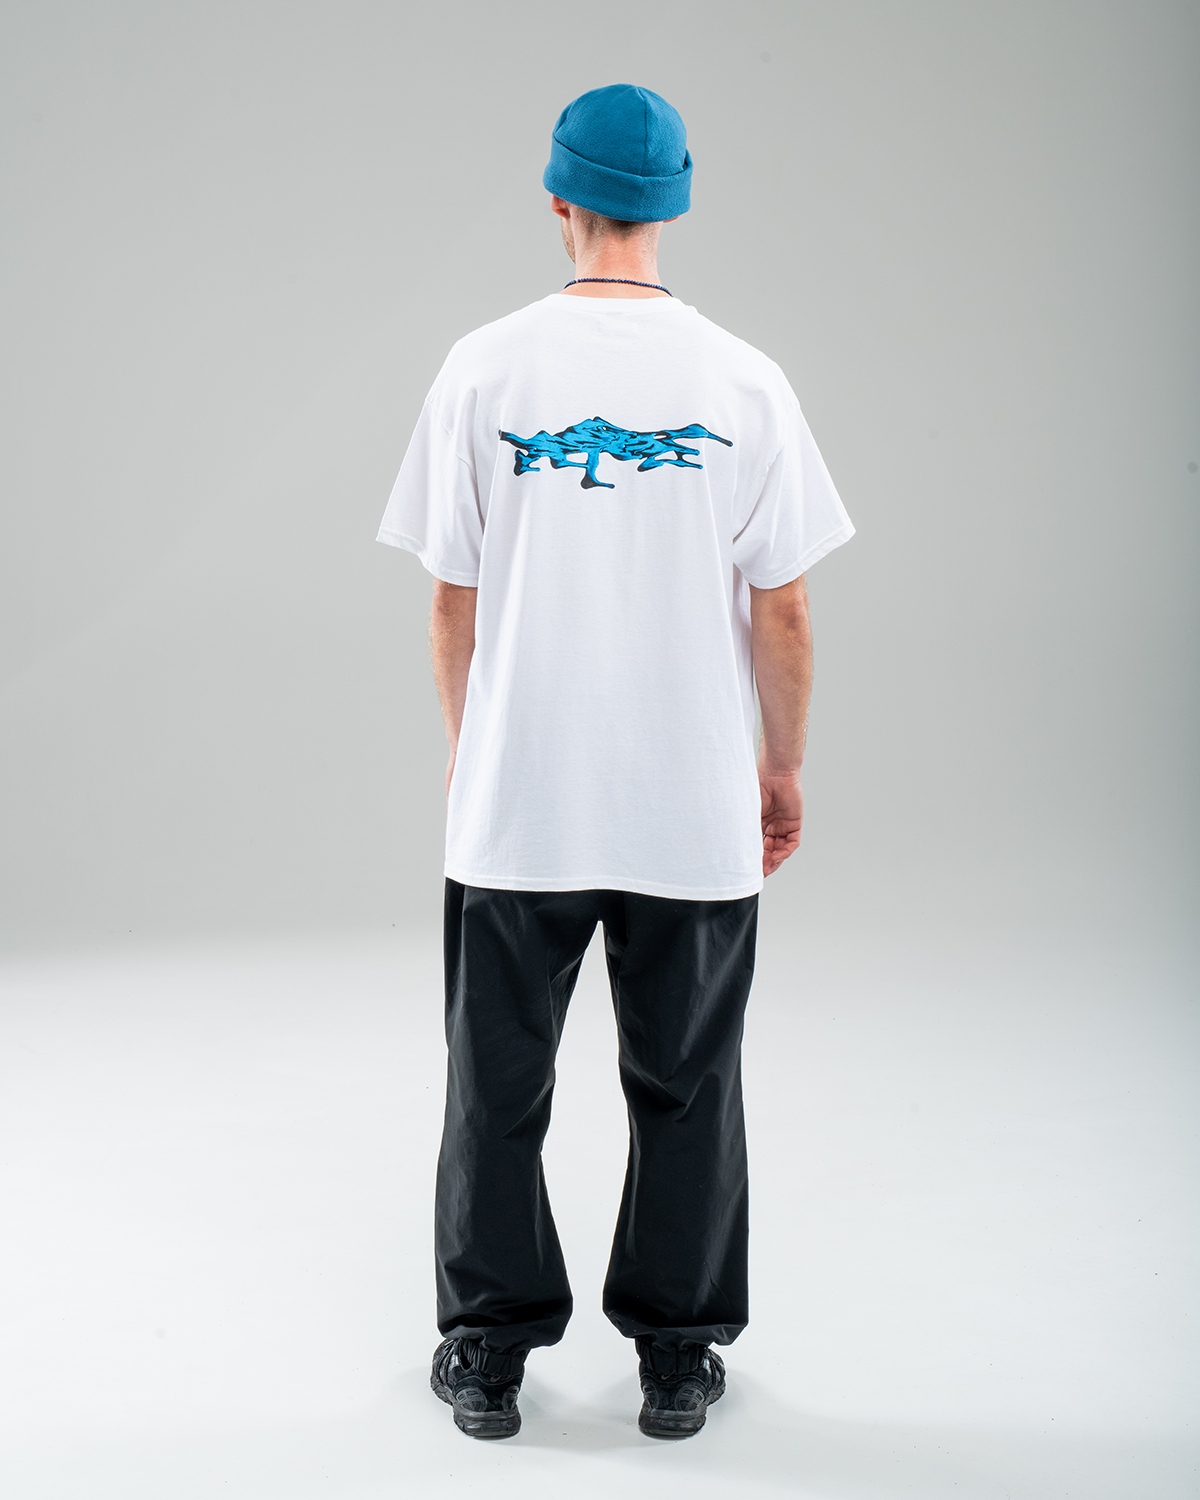 ICE T-SHIRT | STORROR | parkour clothing & technical sportswear